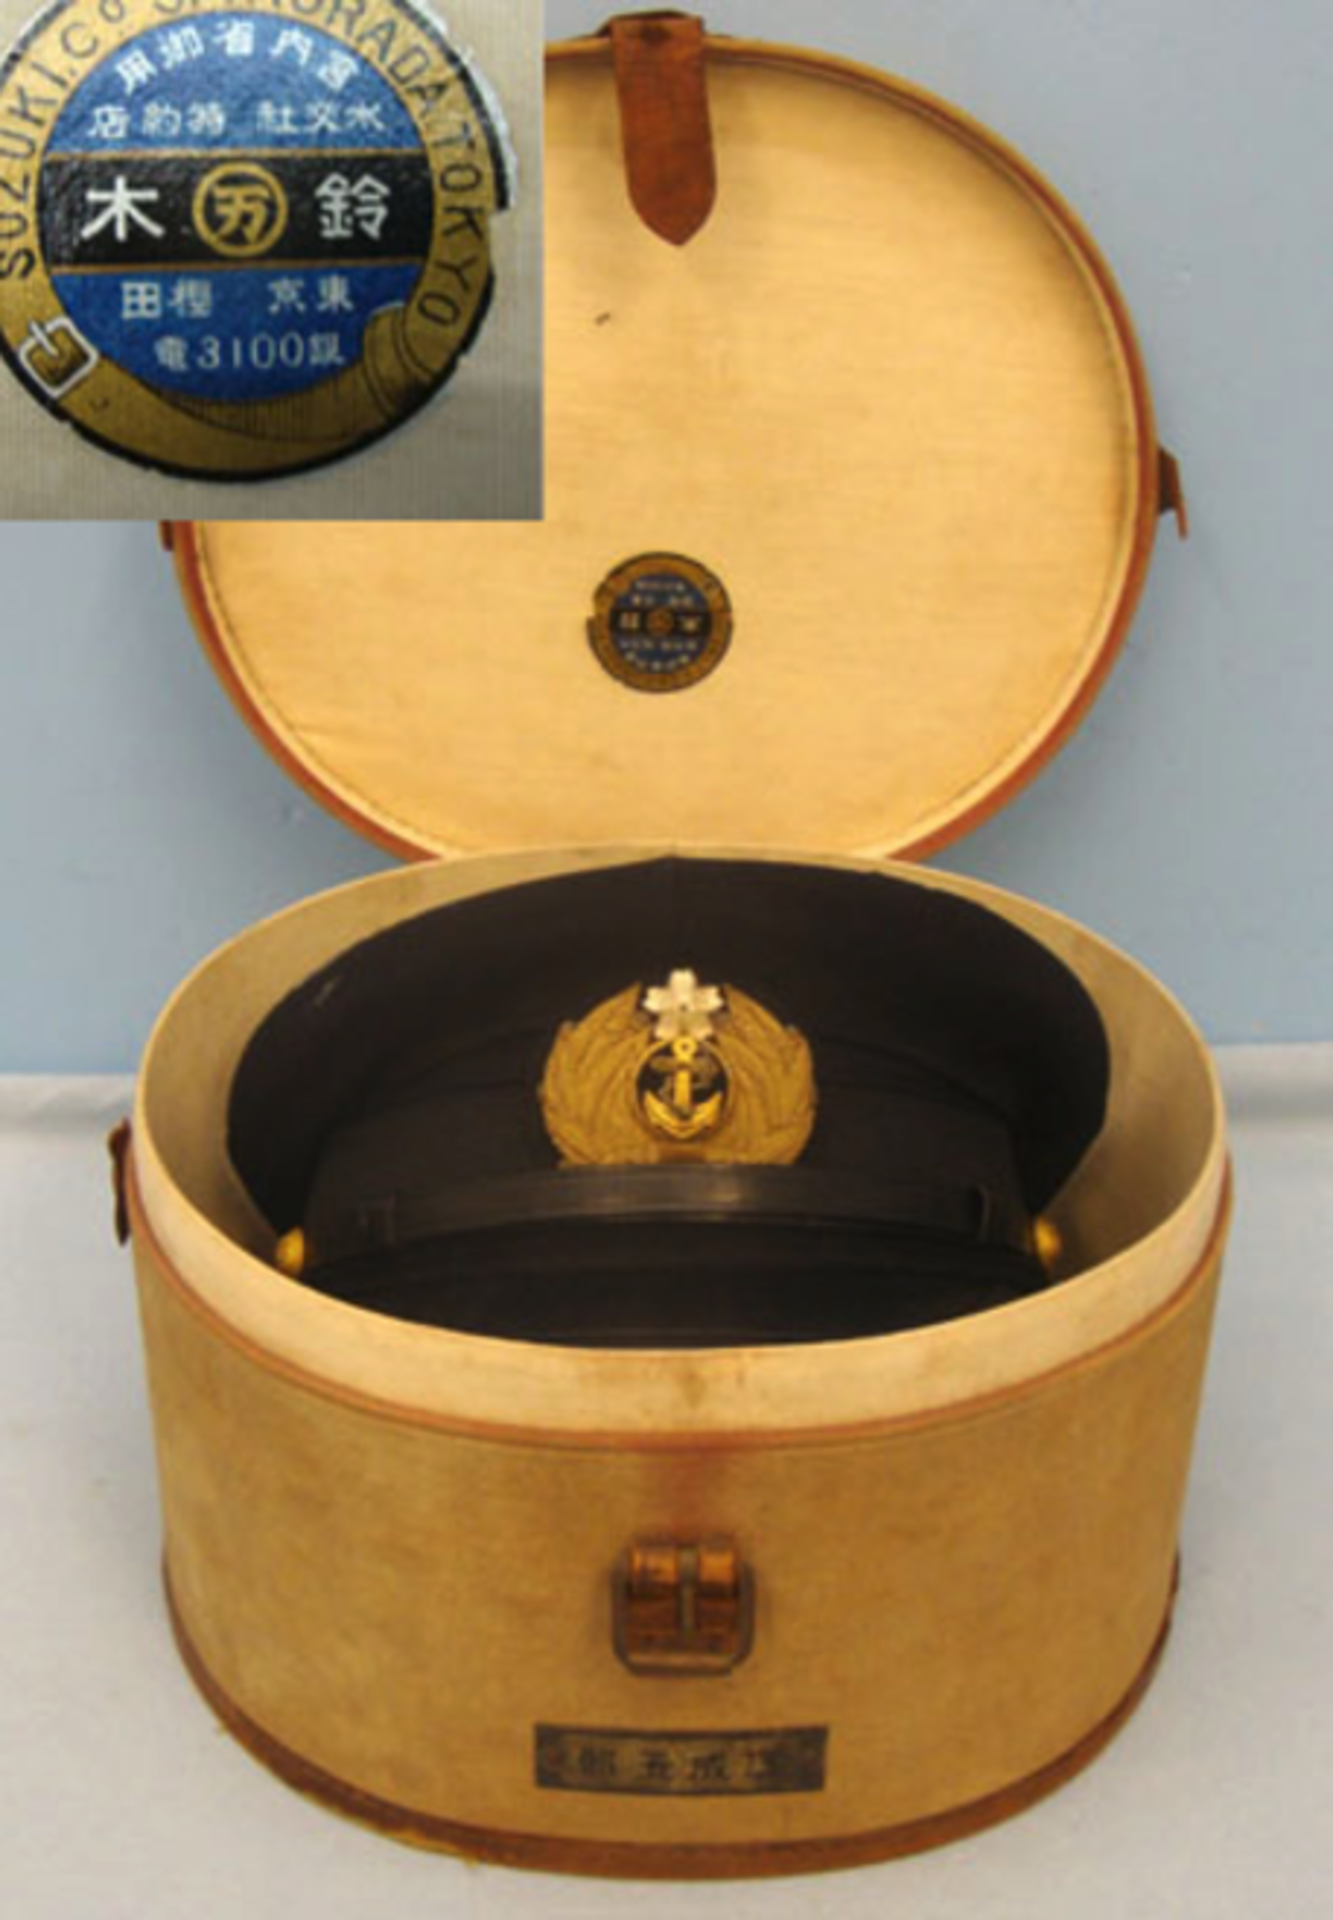 WW2 Japanese Naval Officer's Visor Cap with Bullion Badge in Original Lined Carry Box - Image 2 of 3